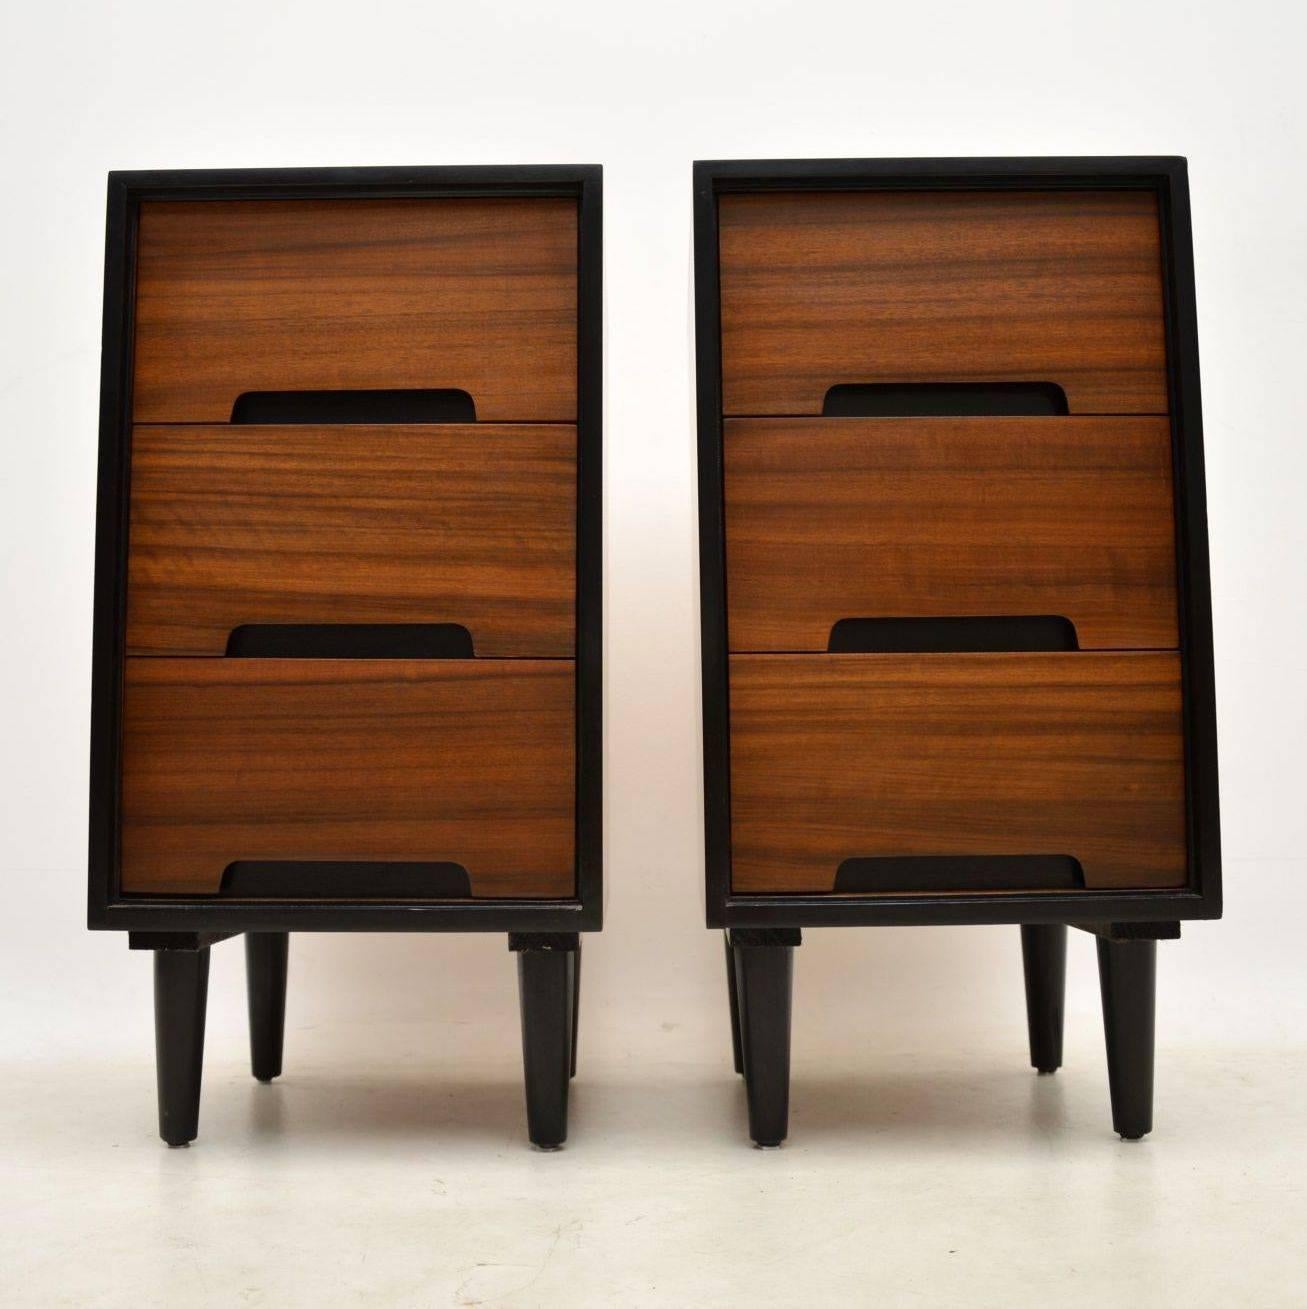 English 1950s Vintage Pair of Walnut Bedside Chests by John & Sylvia Reid for Stag